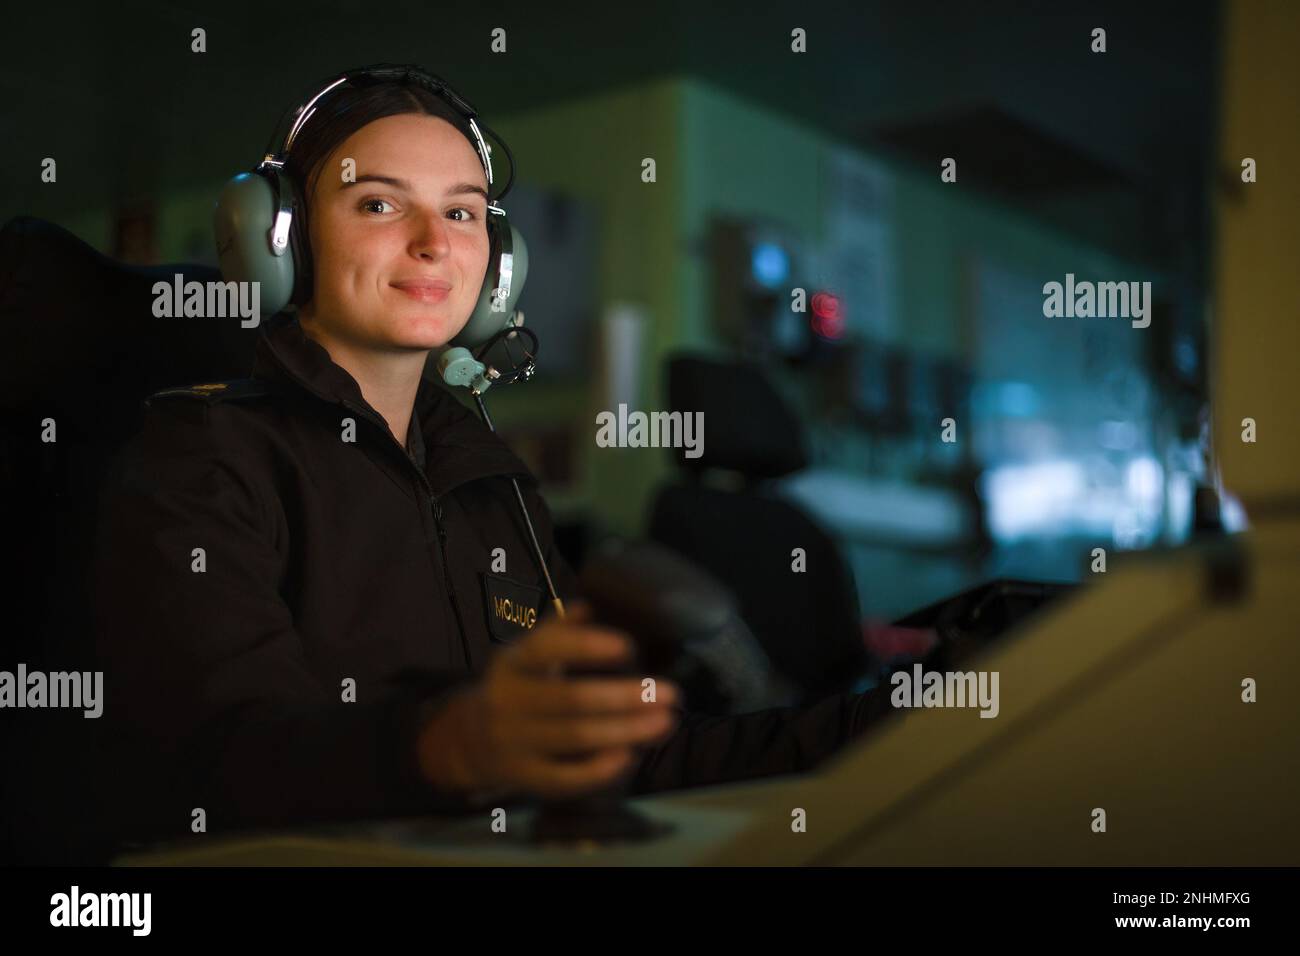 PACIFIC OCEAN (July 30, 2022) Royal Australian Navy Able Seaman Combat Systems Operator Miranda McLaughlin operates the combat system consoles in the Operations Room aboard Royal Australian Navy Canberra-class landing helicopter dock HMAS Canberra (L02) during Rim of the Pacific (RIMPAC) 2022. Twenty-six nations, 38 ships, three submarines, more than 170 aircraft and 25,000 personnel are participating in RIMPAC from June 29 to Aug. 4 in and around the Hawaiian Islands and Southern California. The world's largest international maritime exercise, RIMPAC provides a unique training opportunity whi Stock Photo